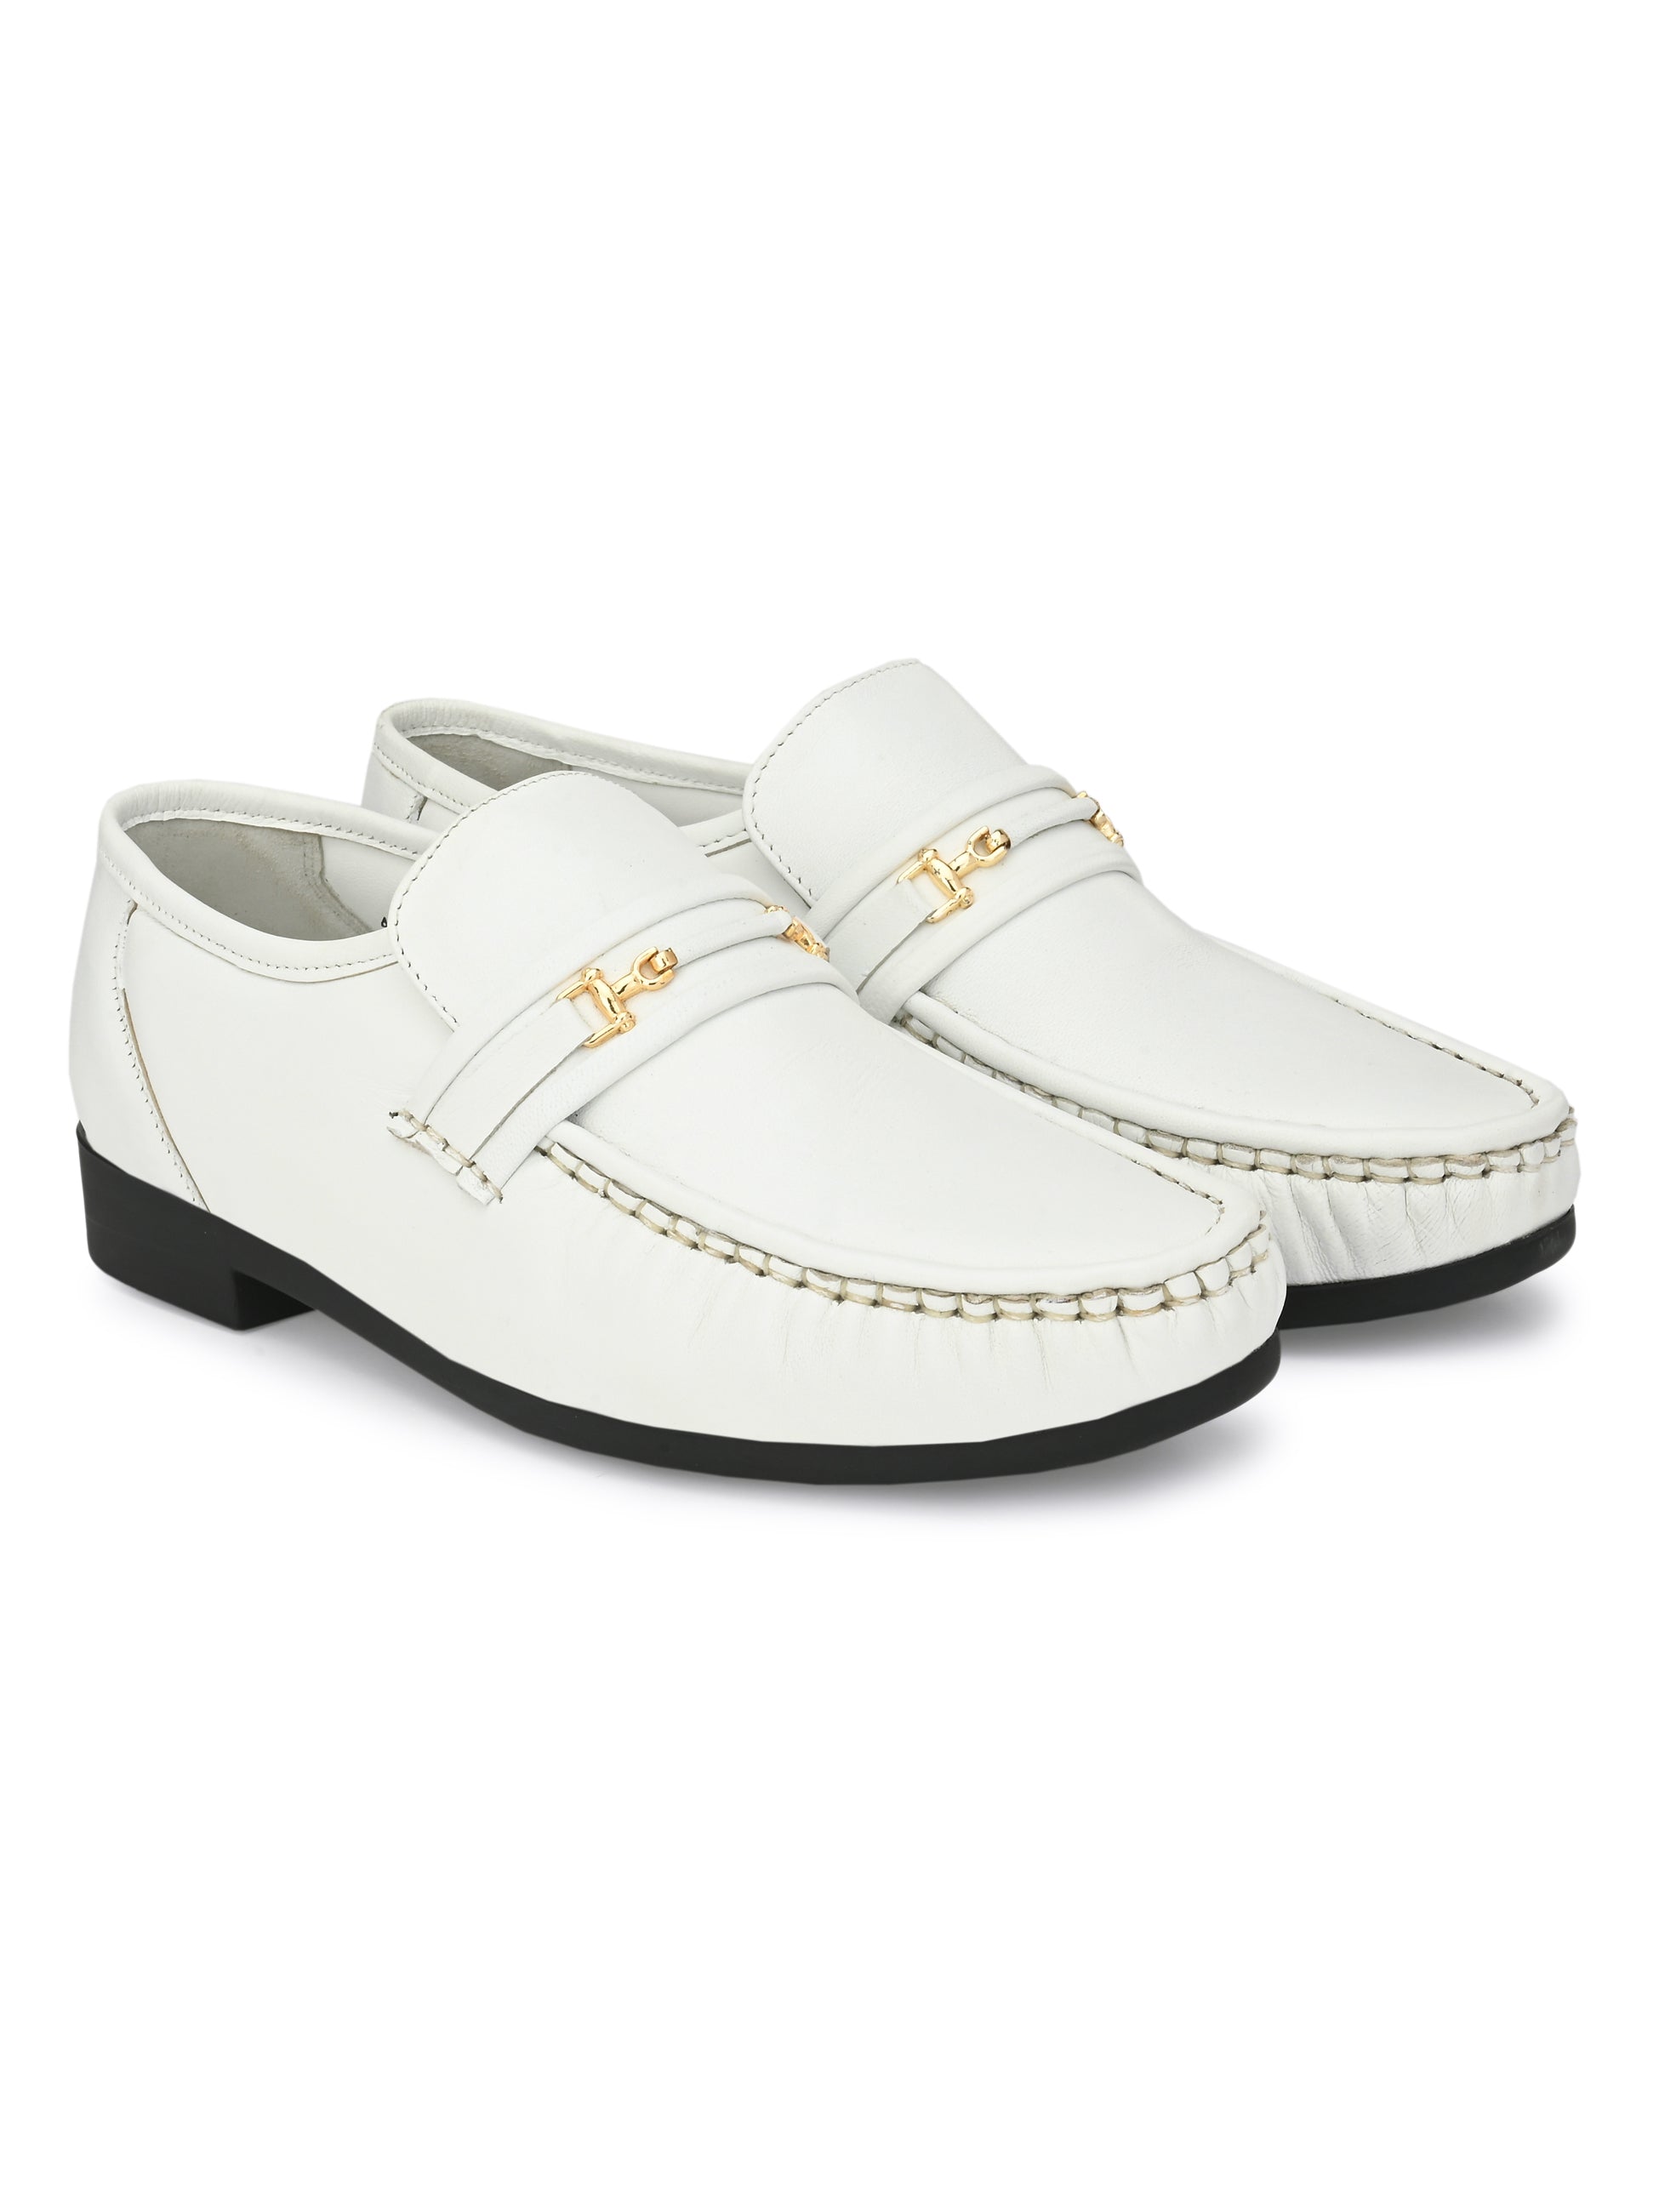 Leather Shoes - Upto 50% to 80% OFF on Leather Shoes Online